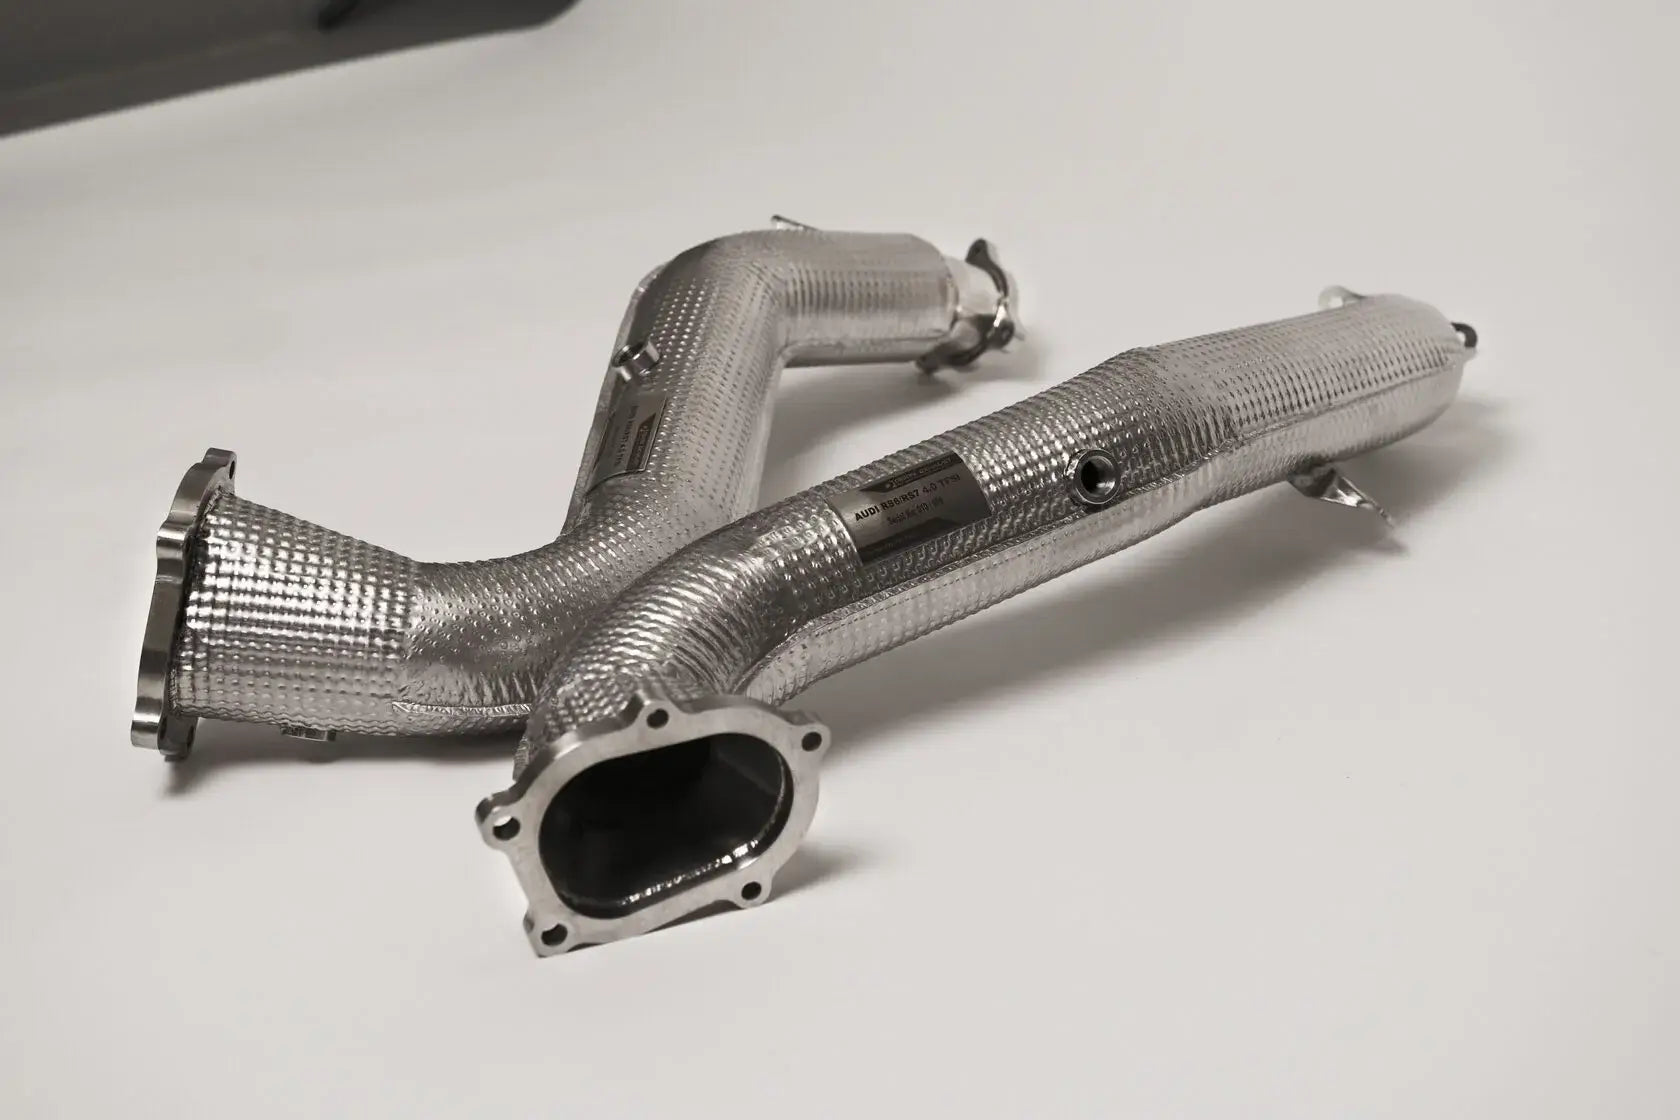 DEIKIN 10-AUDI.RS7.C7-DPT Downpipe for AUDI RS7 (C7) with thermal insulation HeatShield Photo-4 